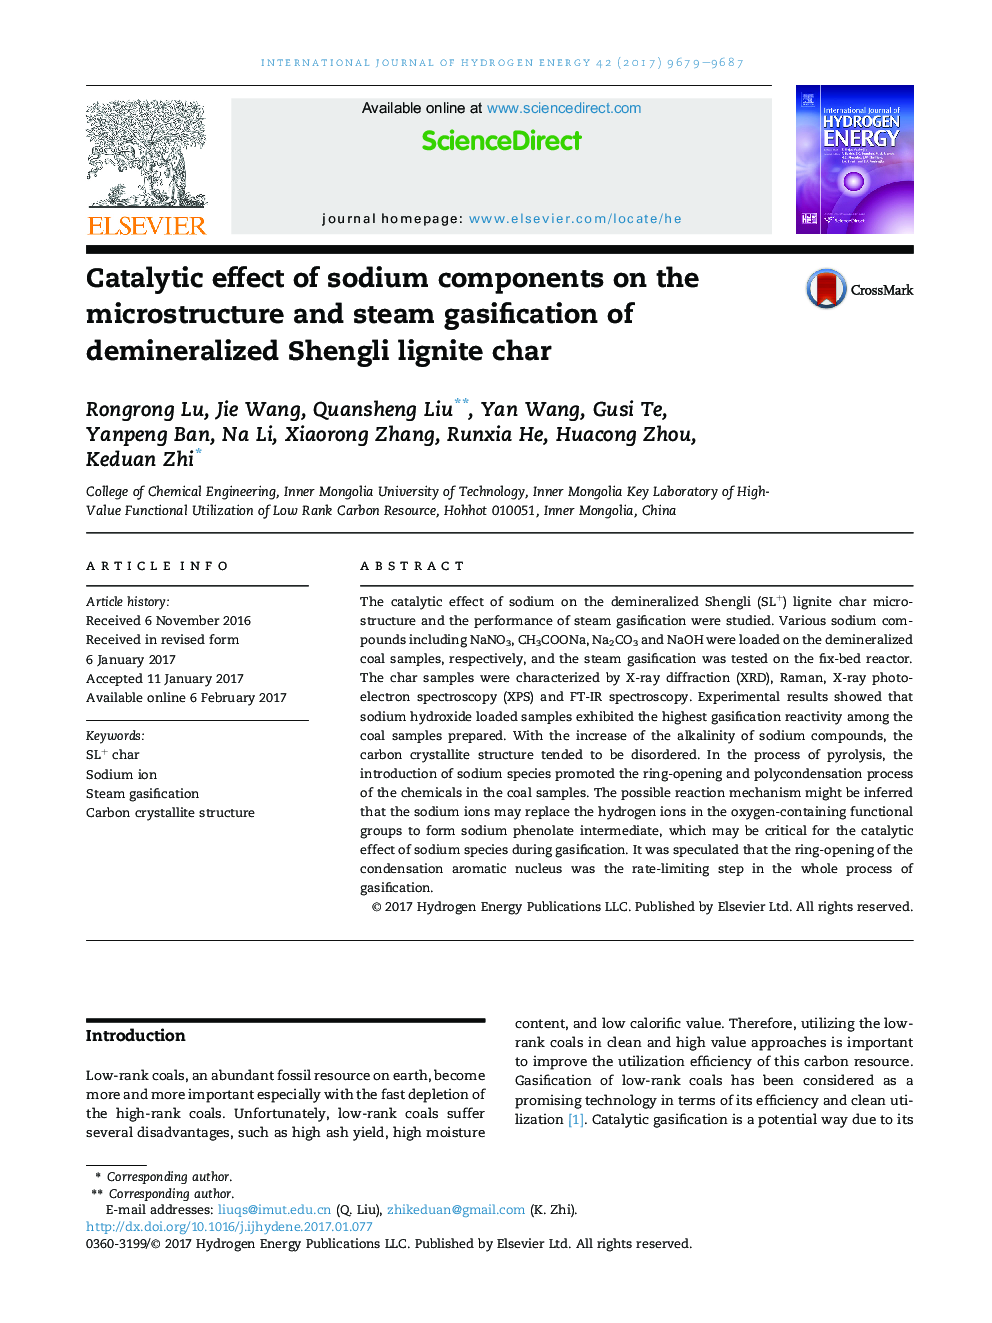 Catalytic effect of sodium components on the microstructure and steam gasification of demineralized Shengli lignite char